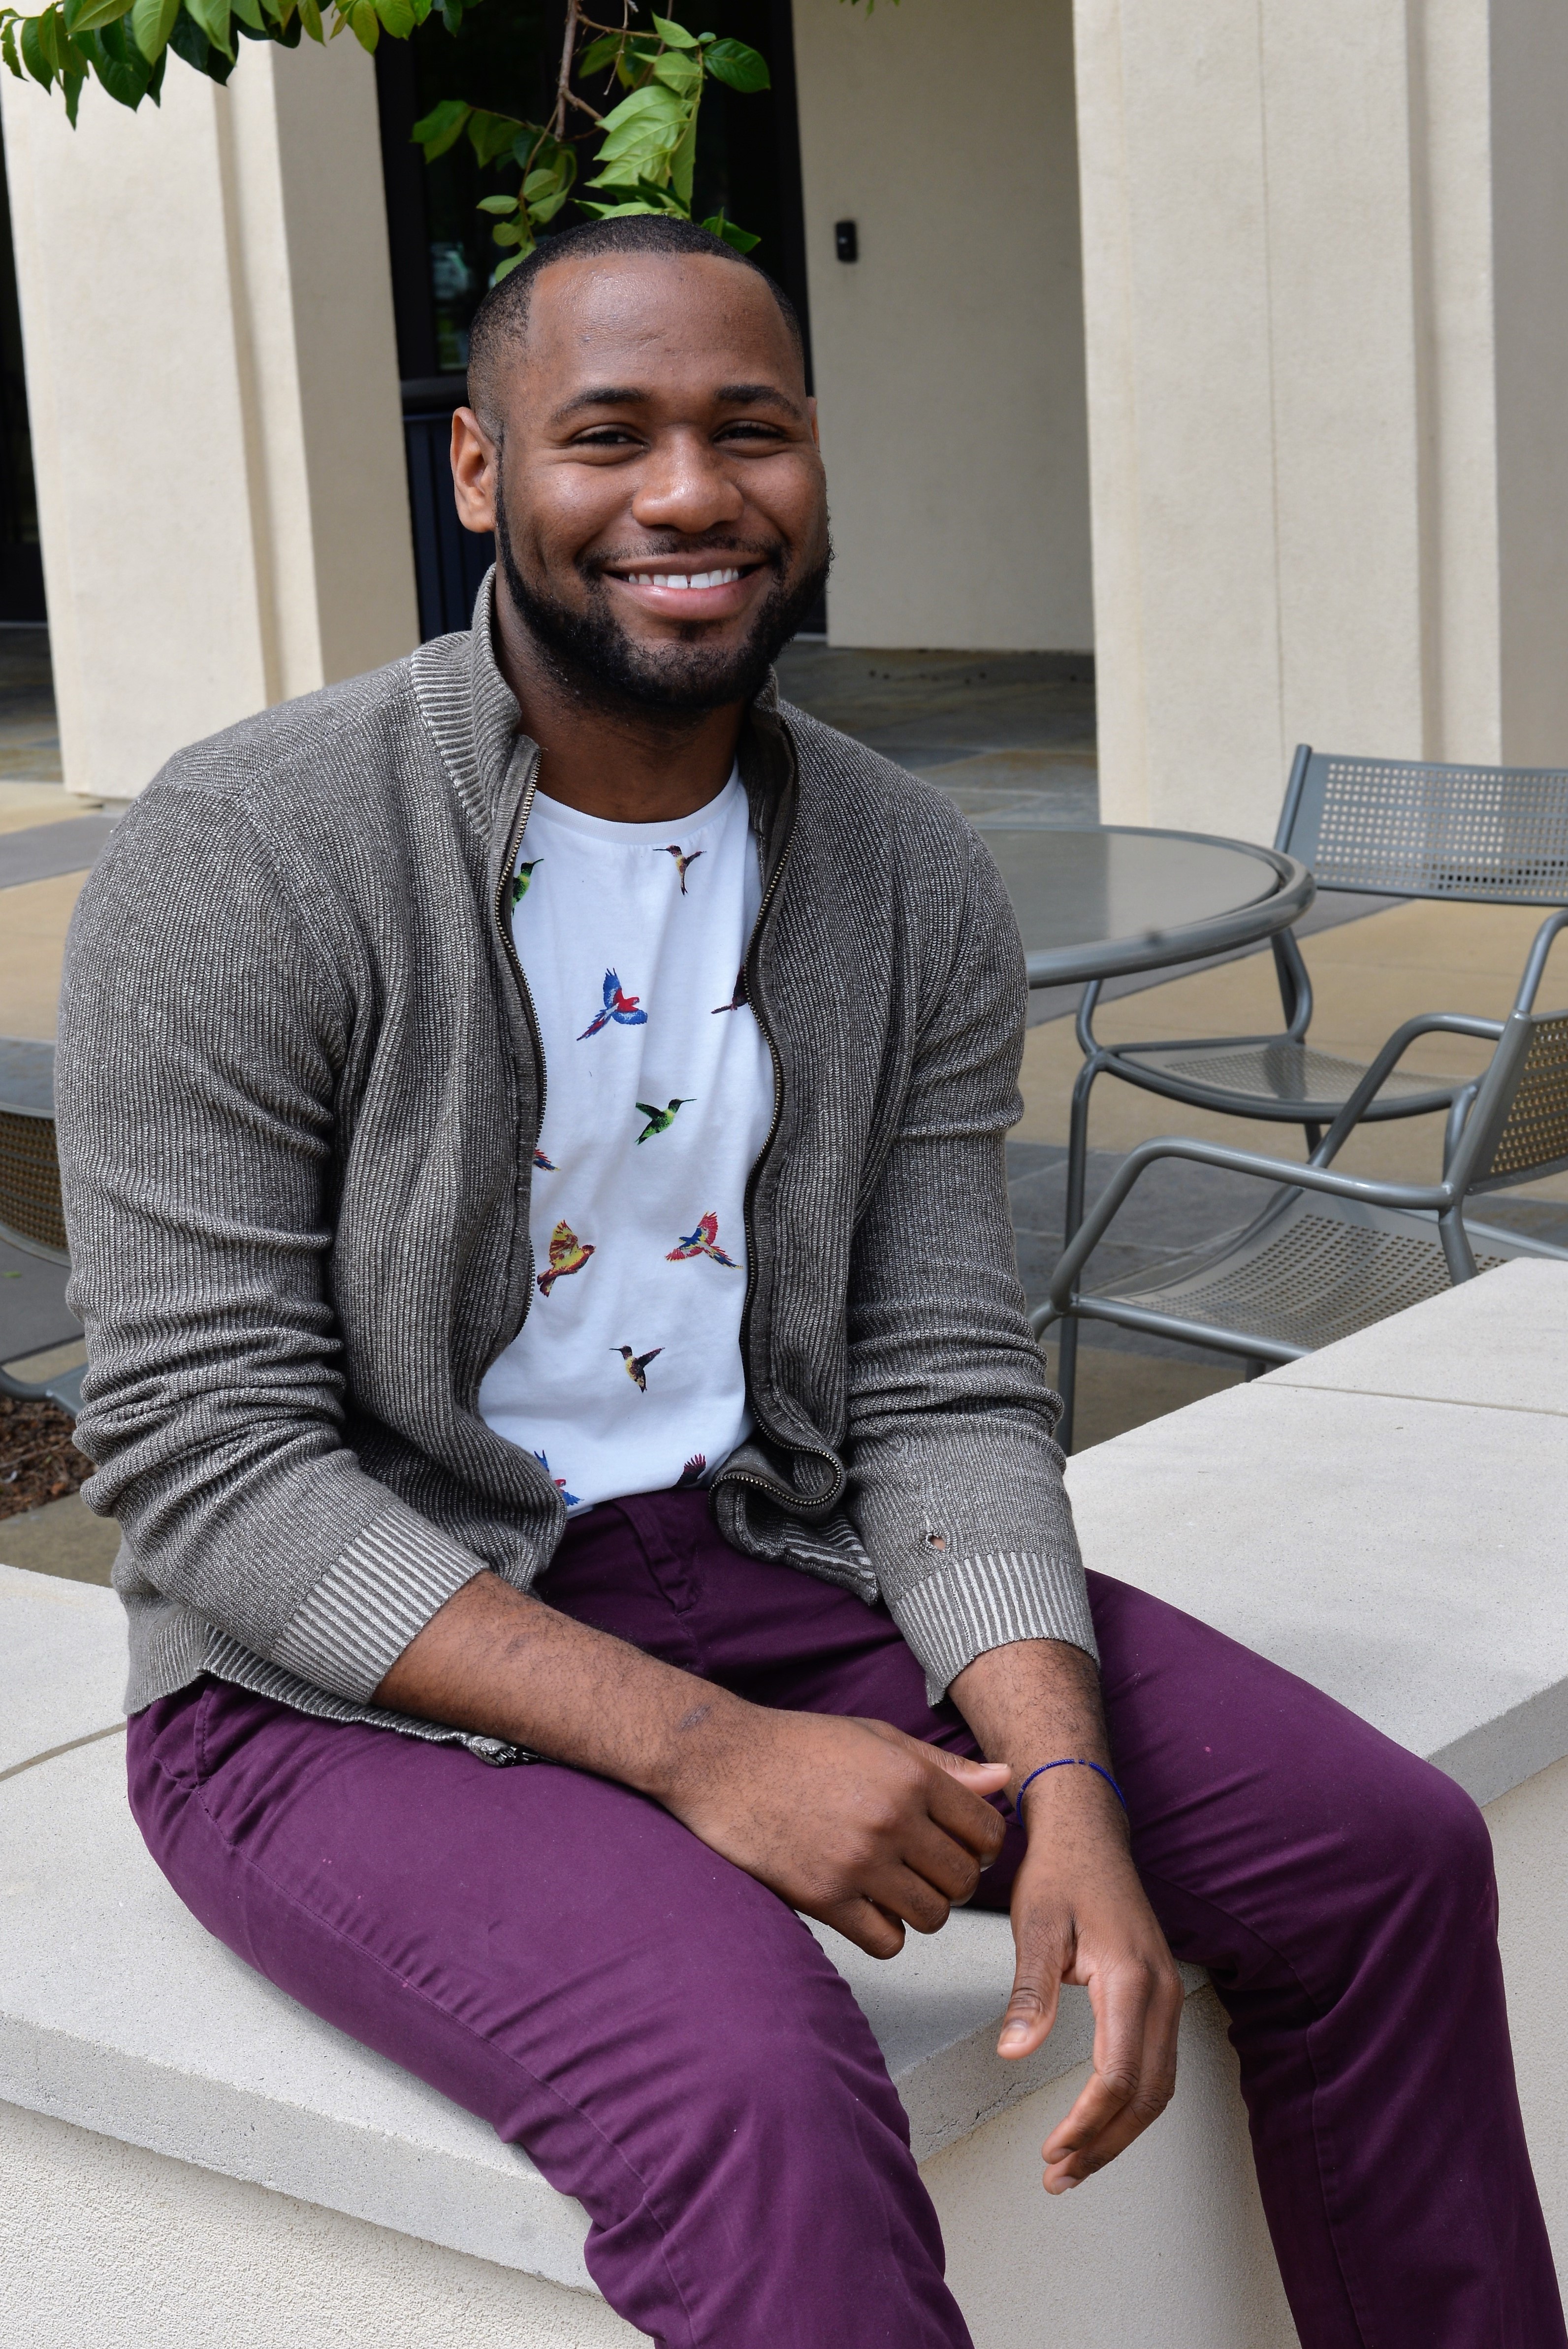 Chris Campbell, will graduate on May 13 with a bachelor's degree in business administration with a concentration in hospitality and tourism. His dream is to open his own restaurant in his hometown of Preston, Georgia.